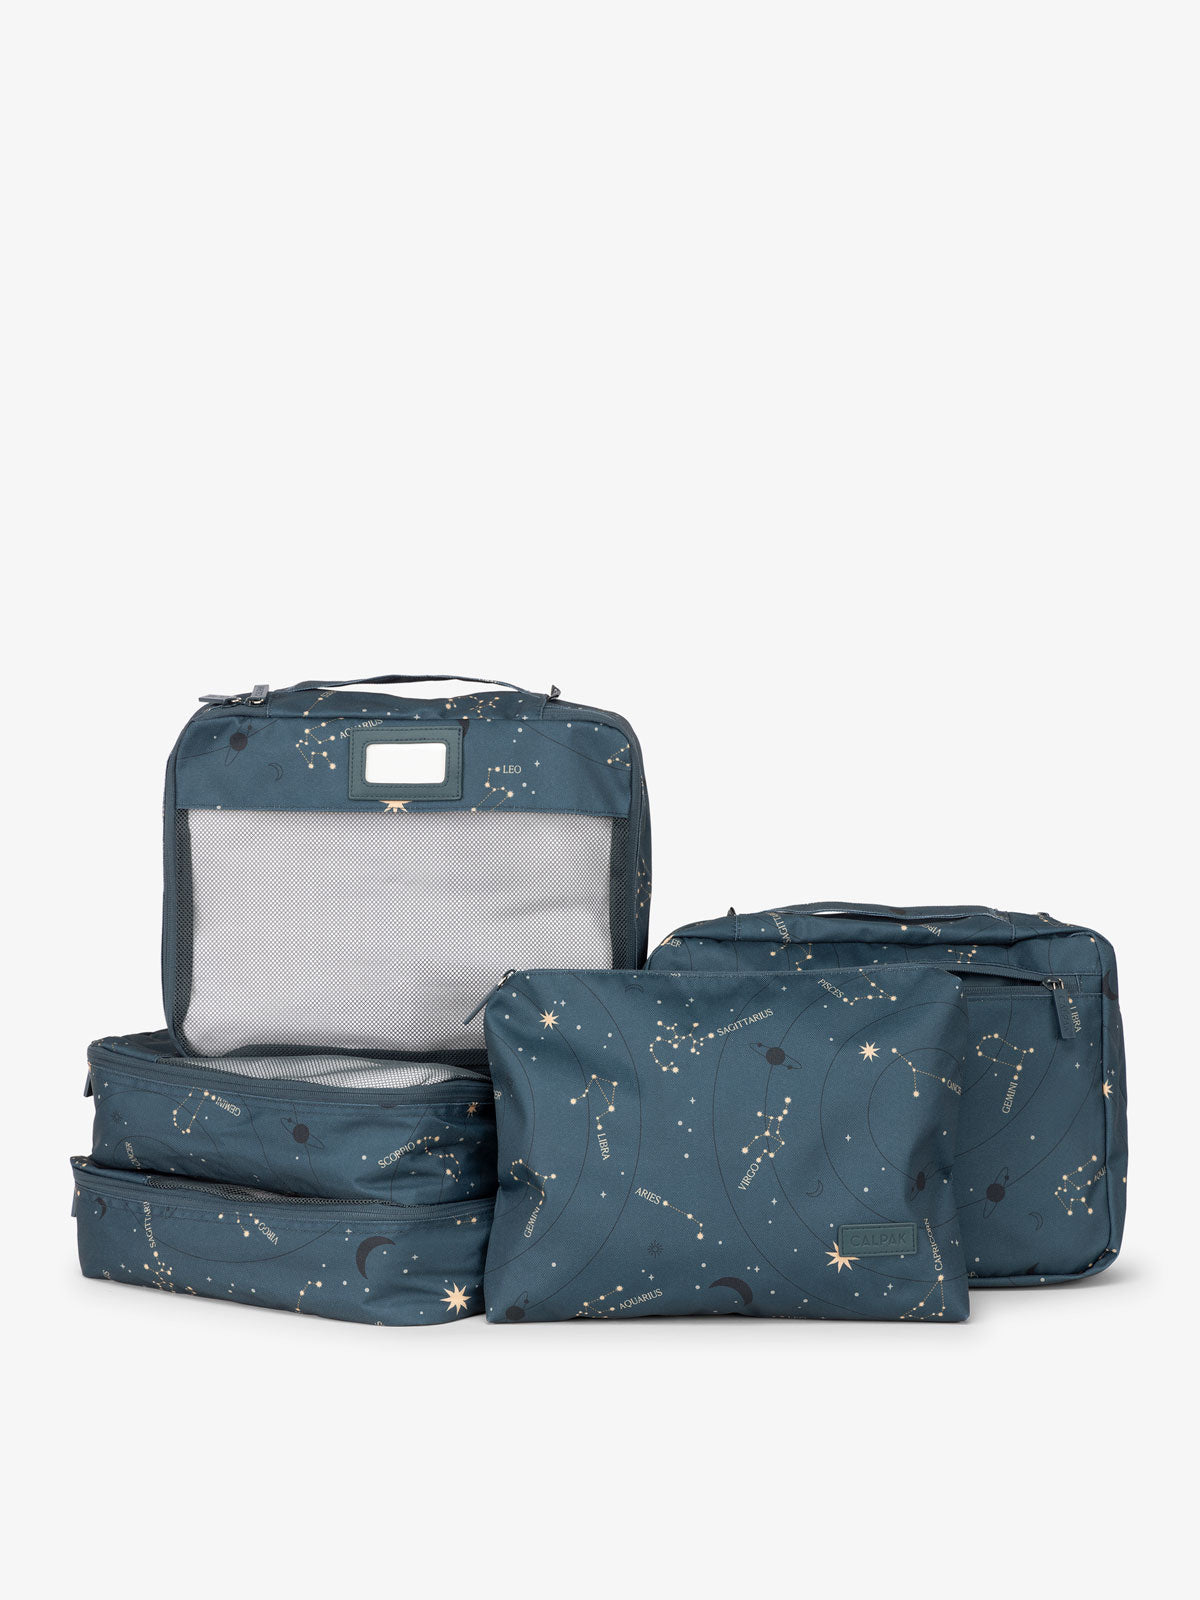 CALPAK packing cubes for travel in astrology